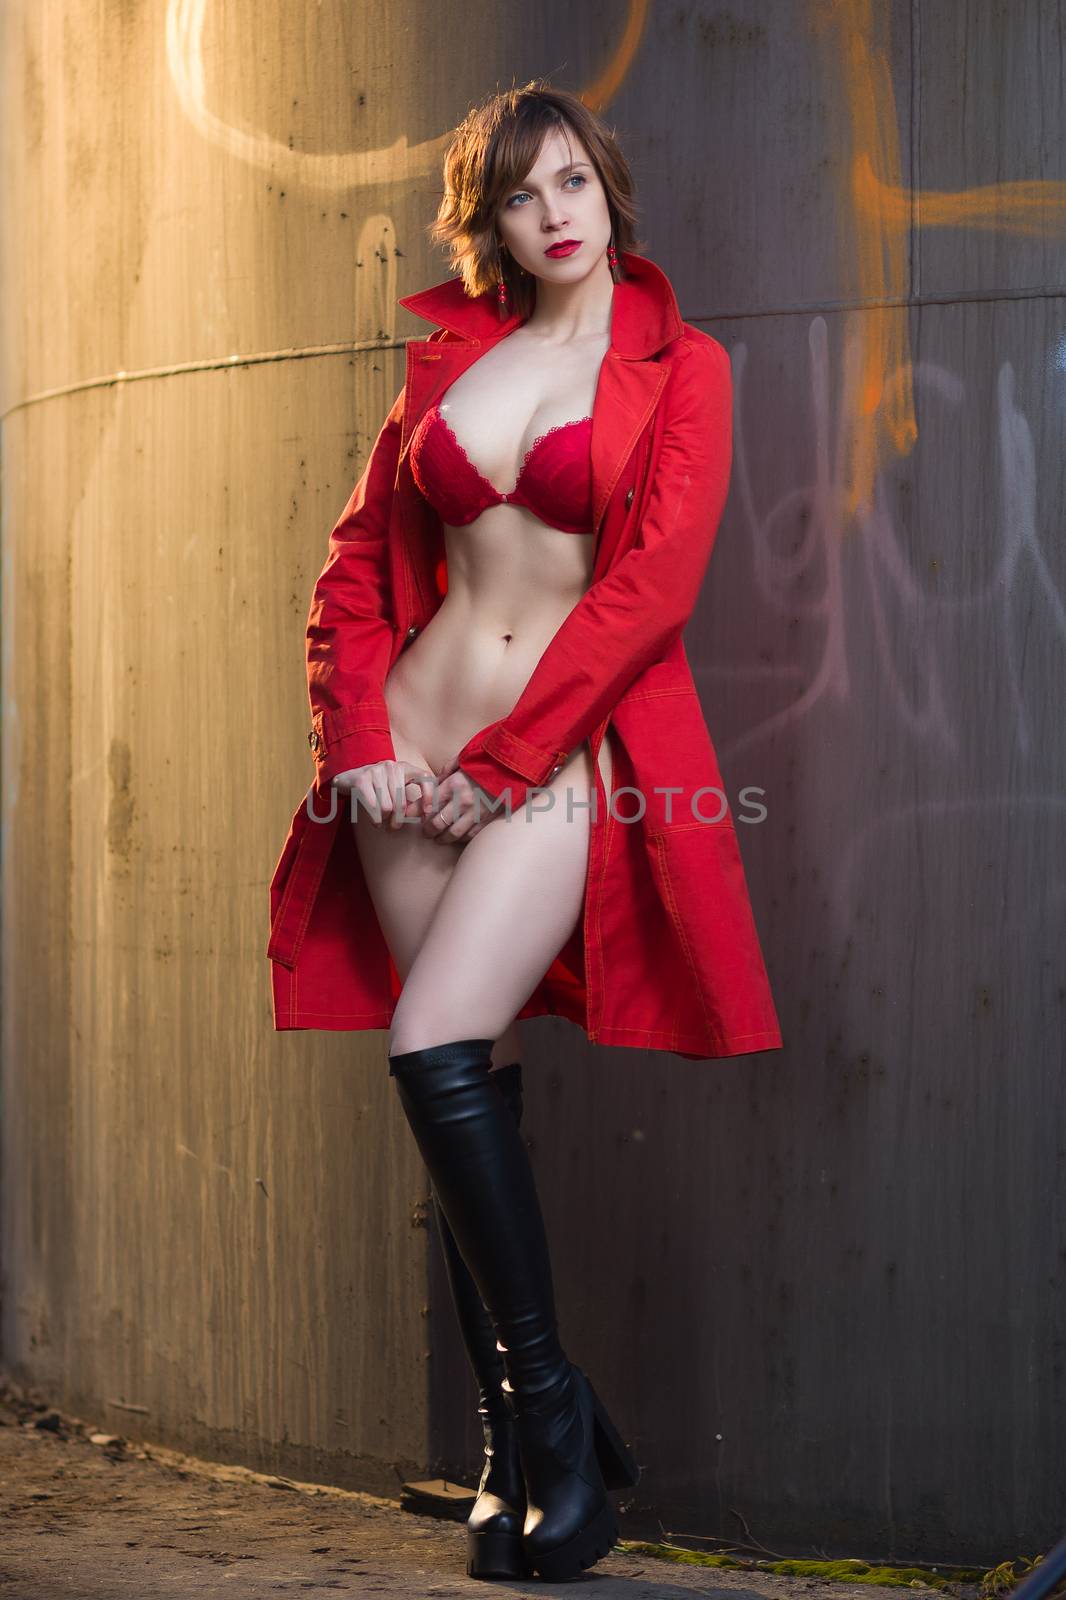 Attractive young woman alluring in sexual lingerie and red coat at grunge industrial setting at sunset. Beauty, fashion. Concept: seduction, exhibitionism.